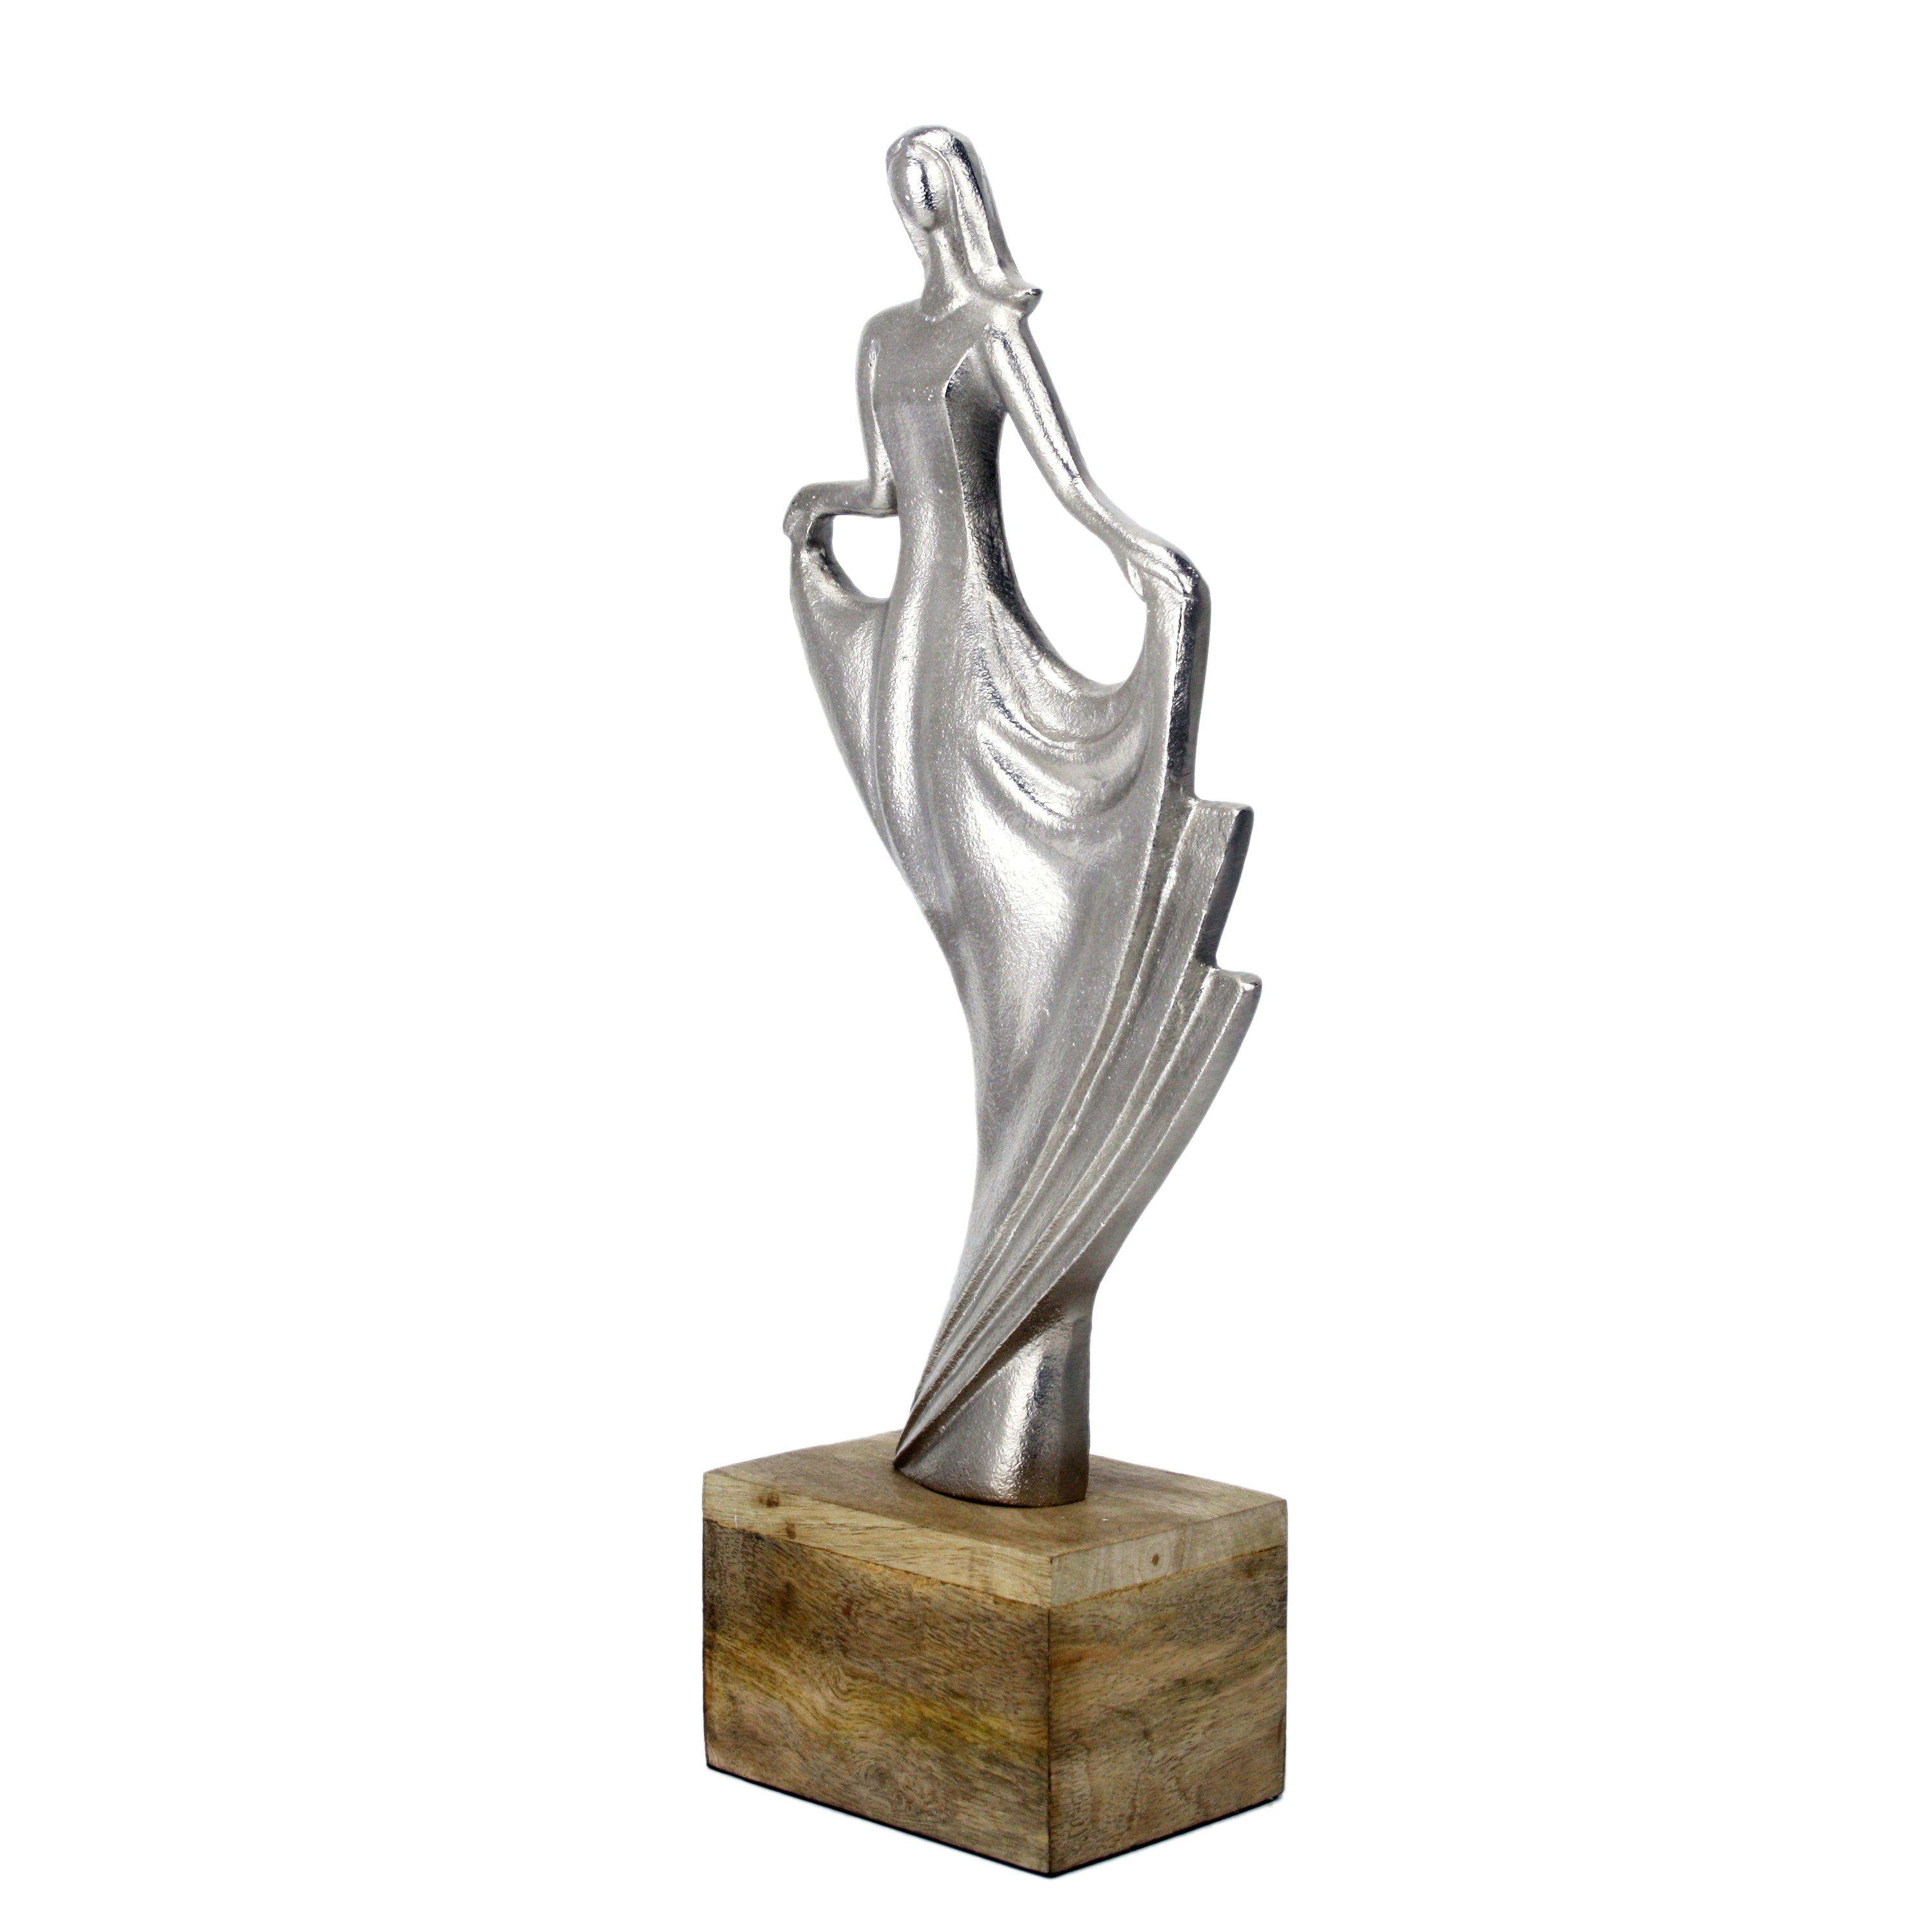 Whimsy Silver Lady Figurine